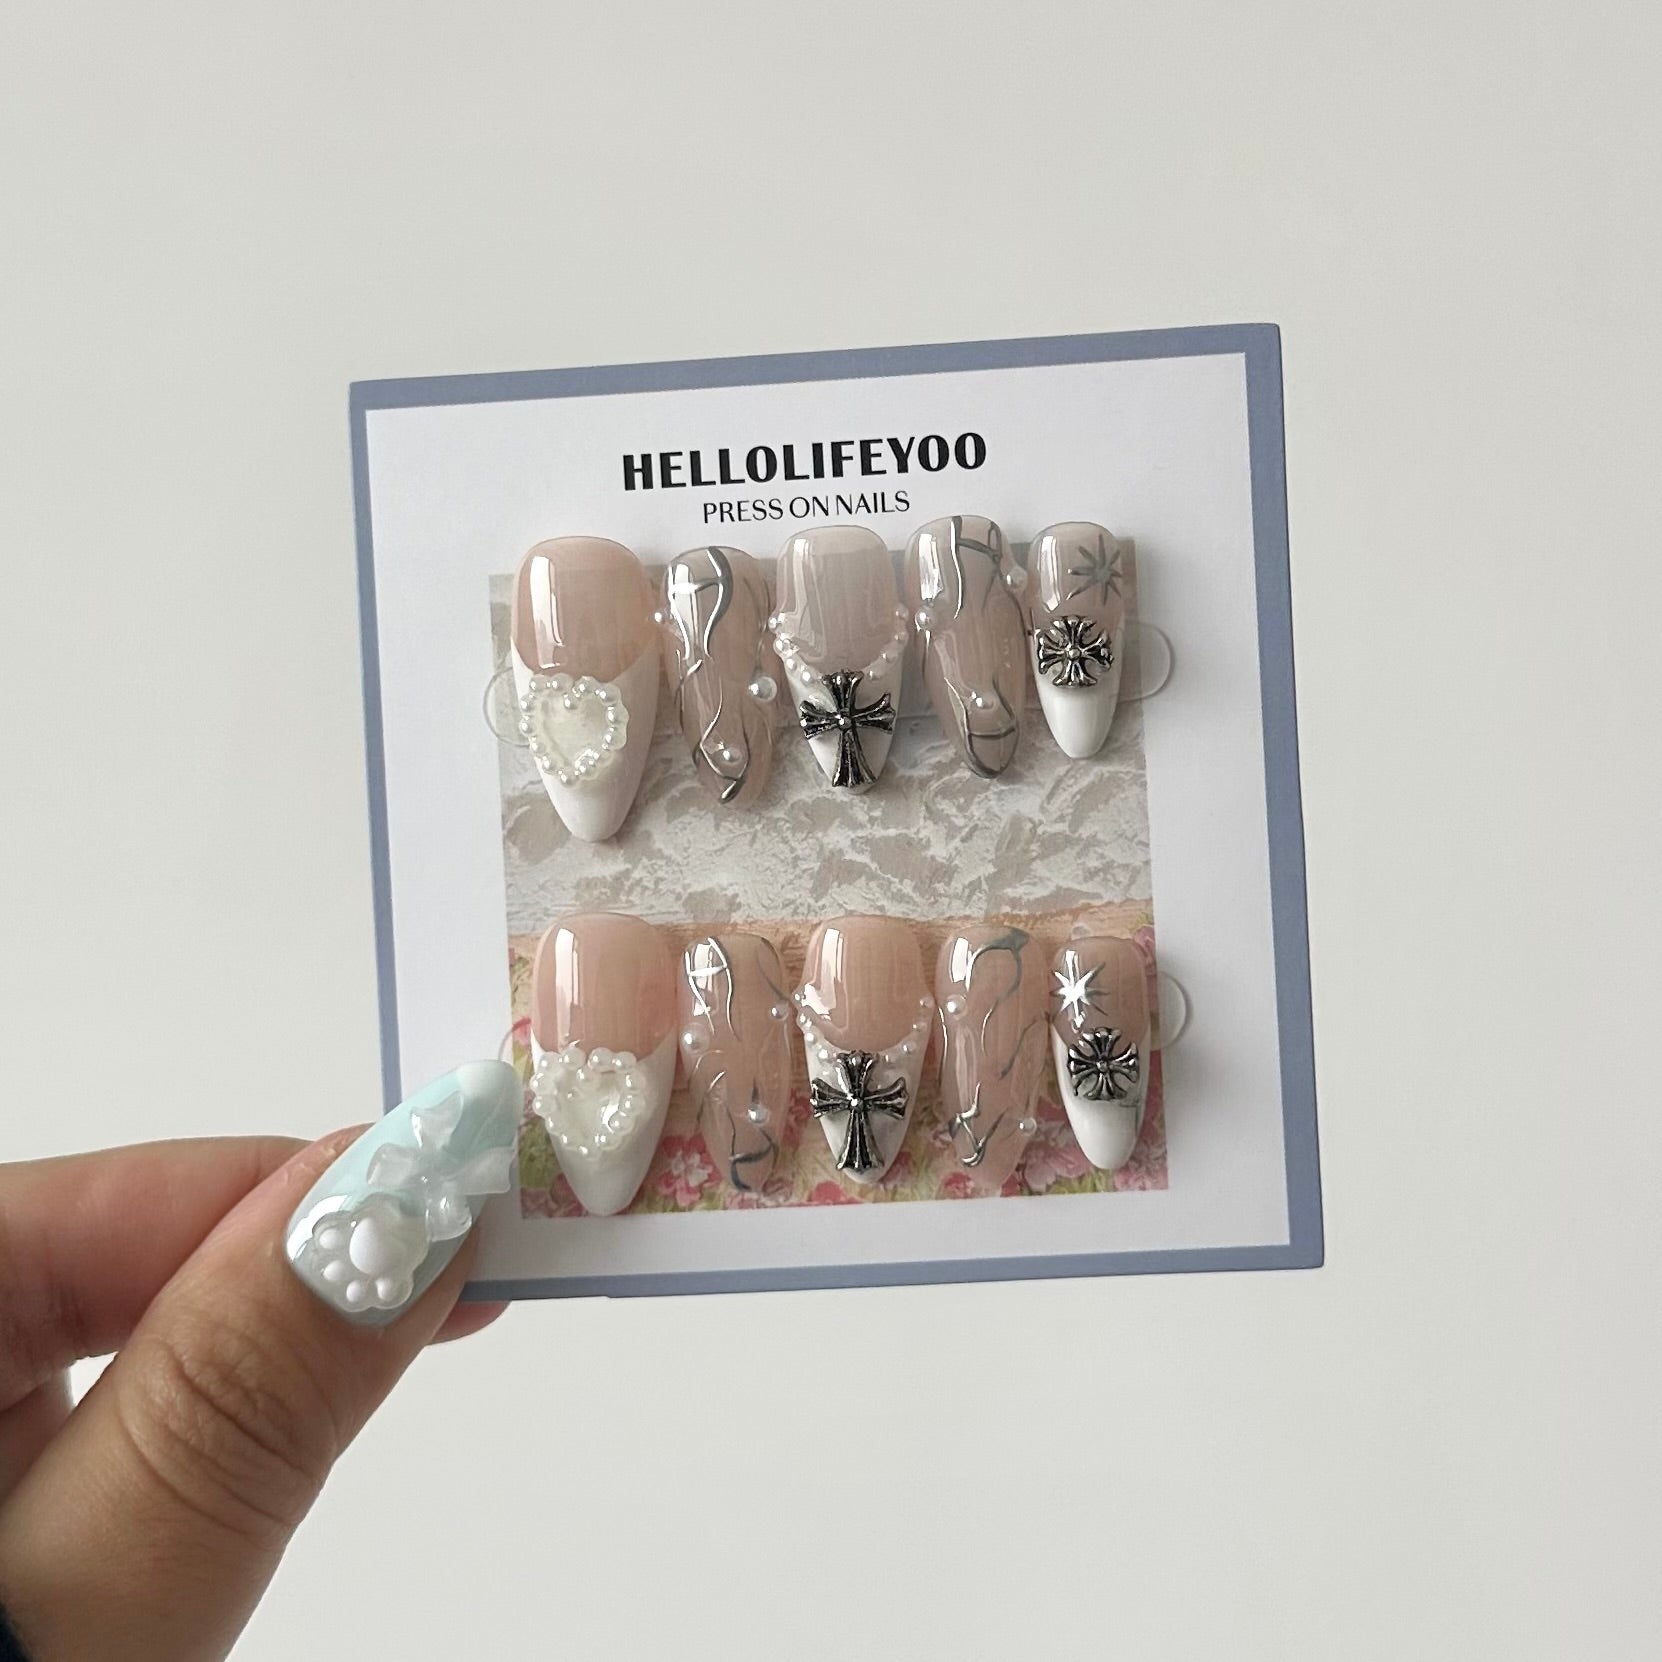 MWAH-TEN PIECES OF HANDCRAFTED PRESS ON NAIL